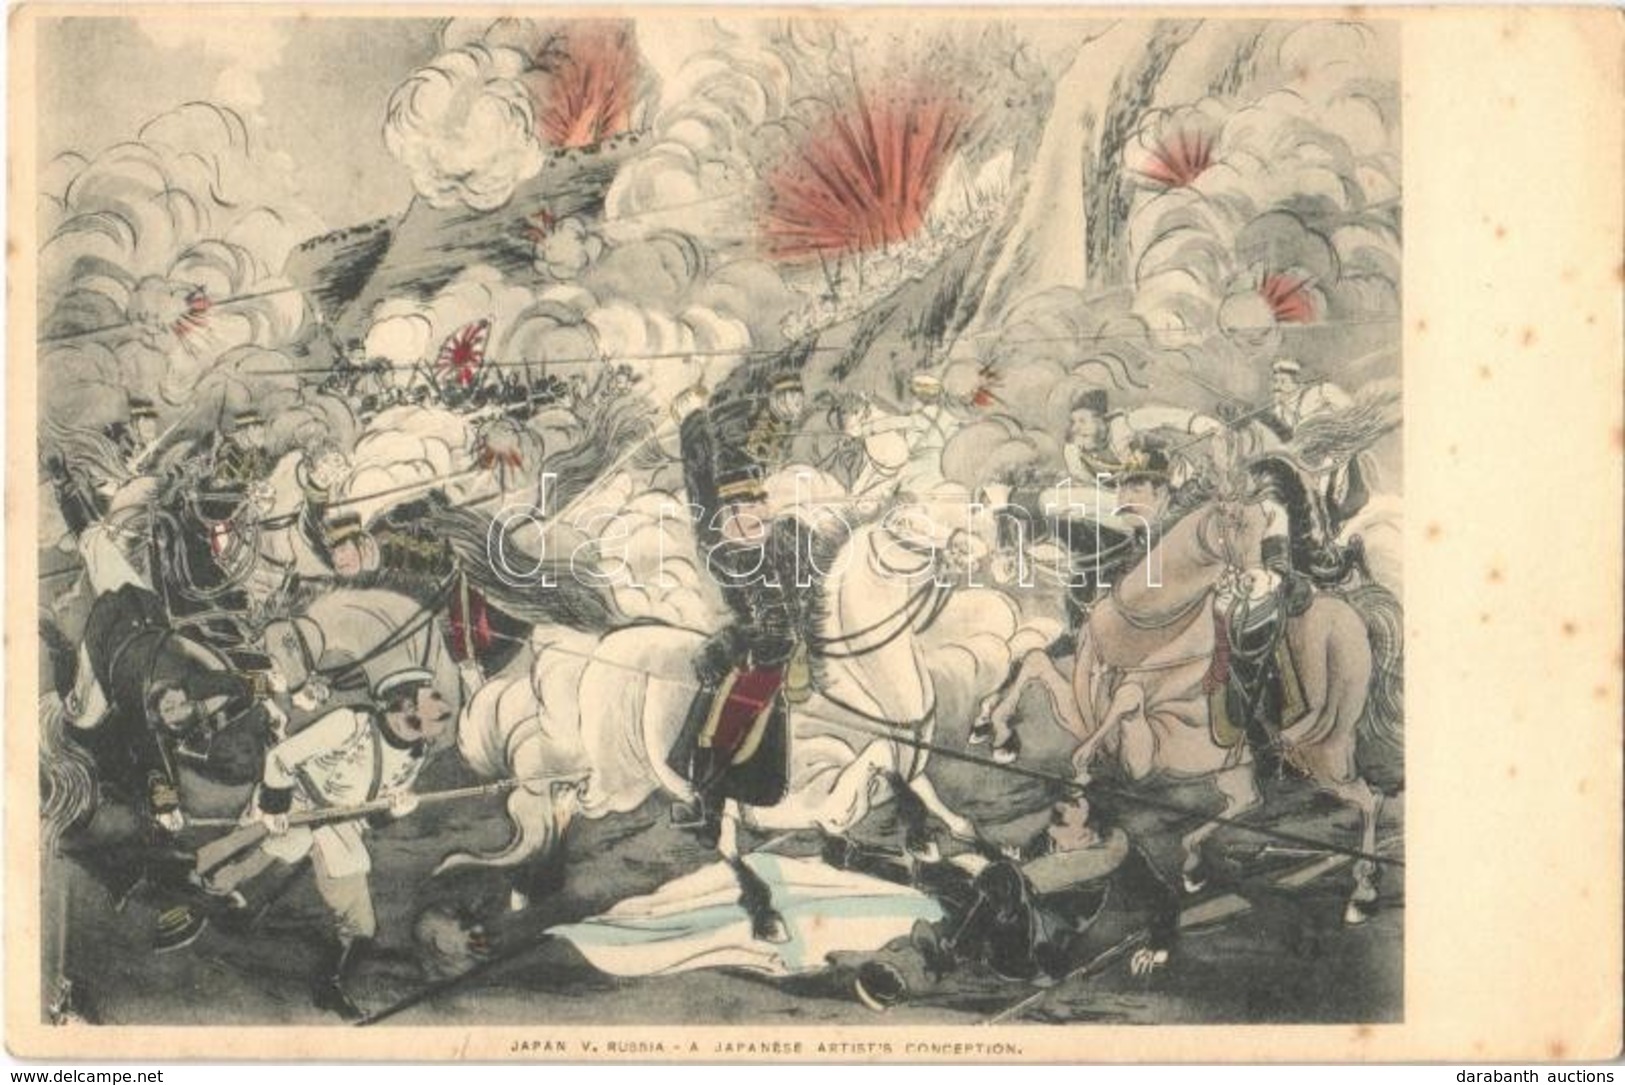 ** T2/T3 Japan V. Russia - A Japanese Artist's Conception. Russo-Japanese War, Cavalry (wet Corner) - Unclassified